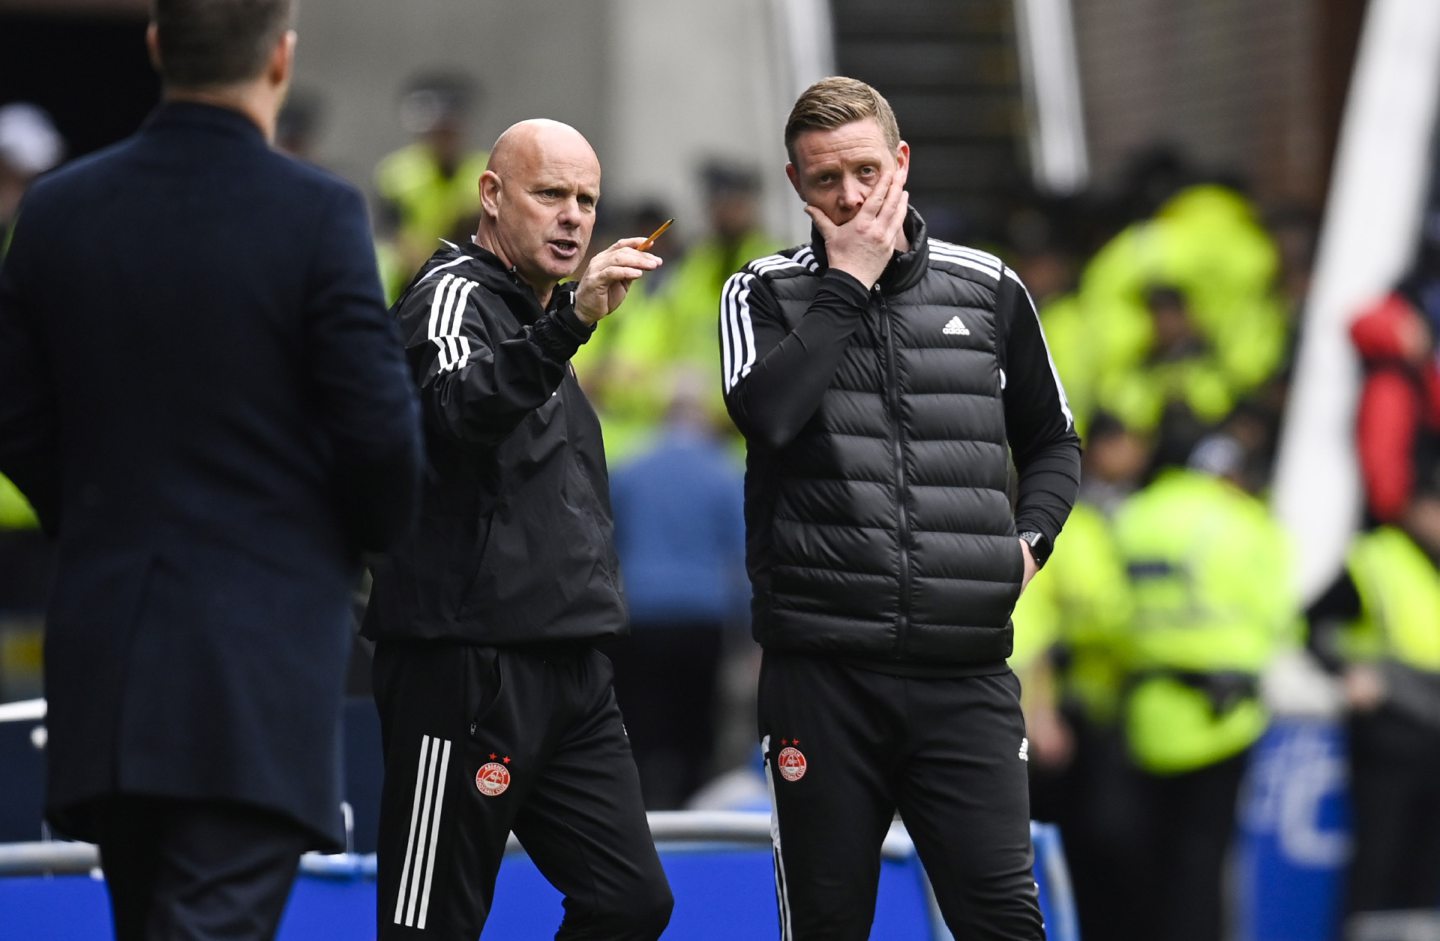 Aberdeen manager Barry Robson and assistant Steve Agnew during the 3-1 defeat of Rangers at Ibrox. Image: SNS 